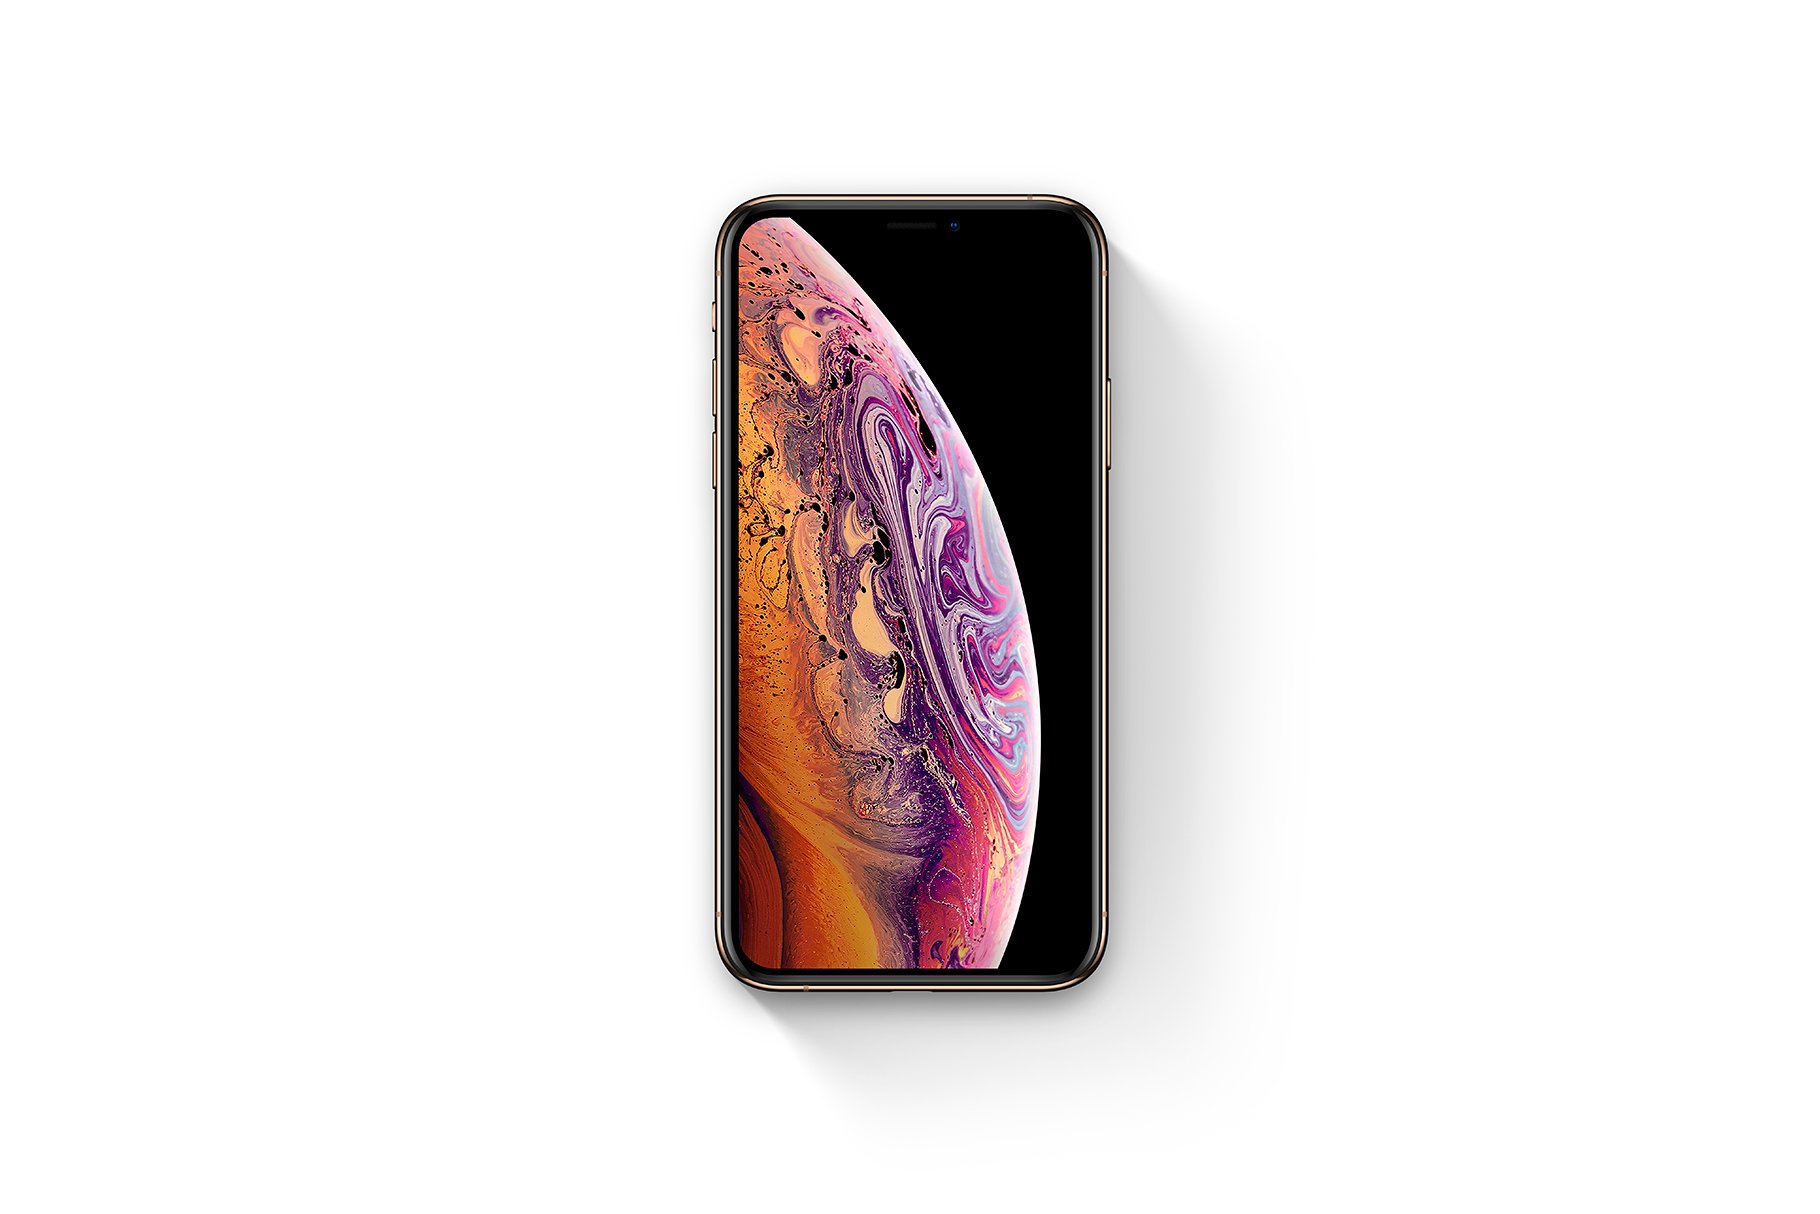 Phone XS & XR Mockup 5K - PSD preview image.